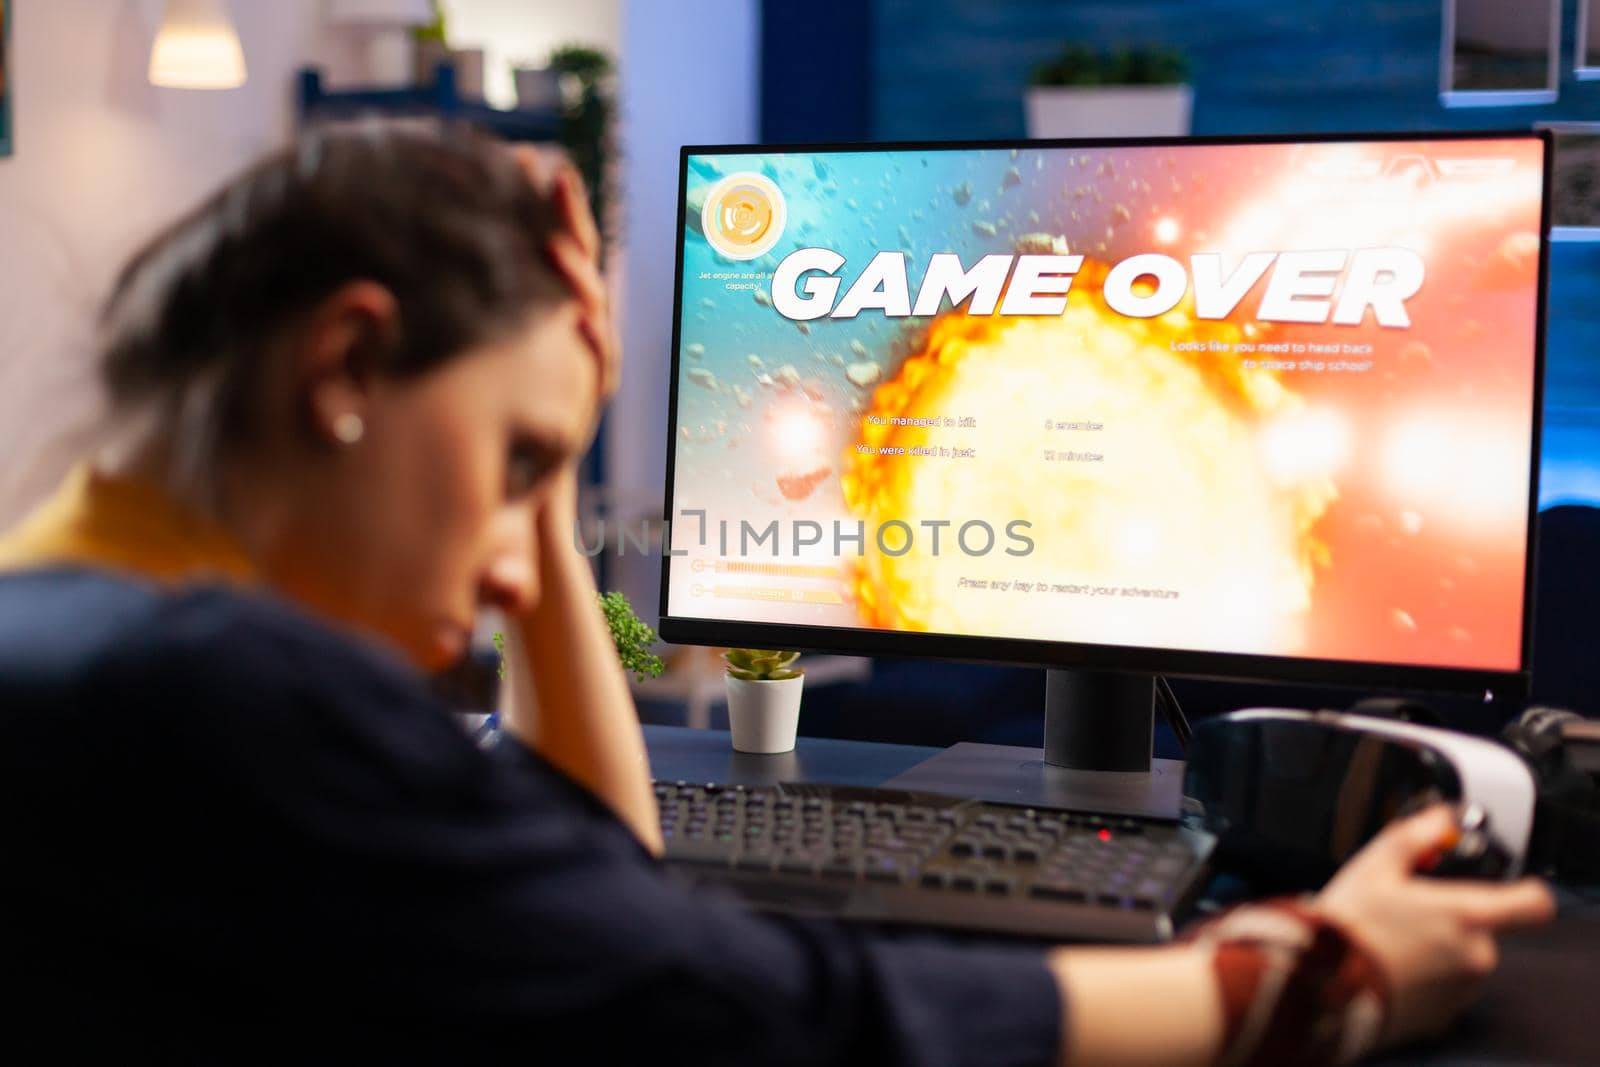 Caucasian gamer losing space shooter videogame competition on professional powerful computer. Professional pro gamer streaming online game with new graphics using modern equipment